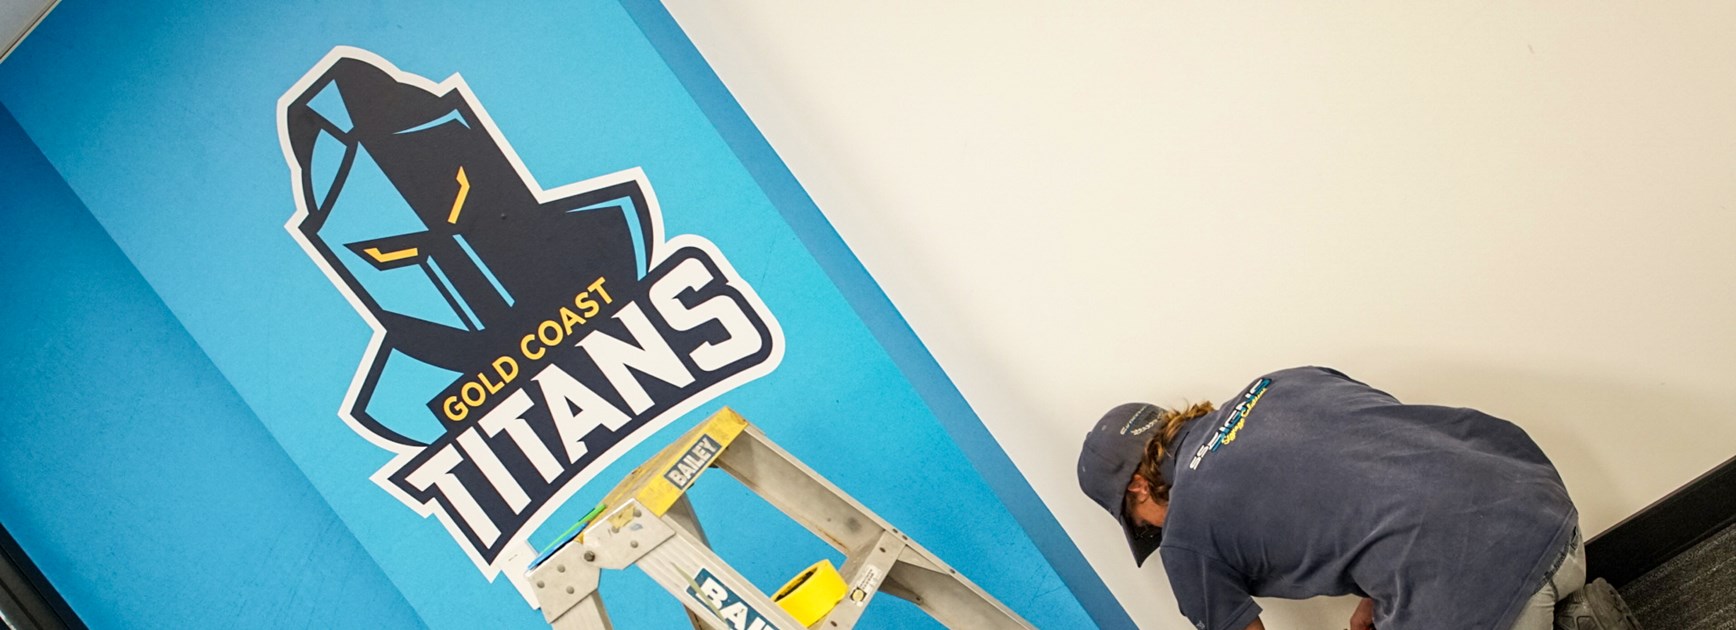 A sign of the times, SS Signs help capture Titans brand refresh